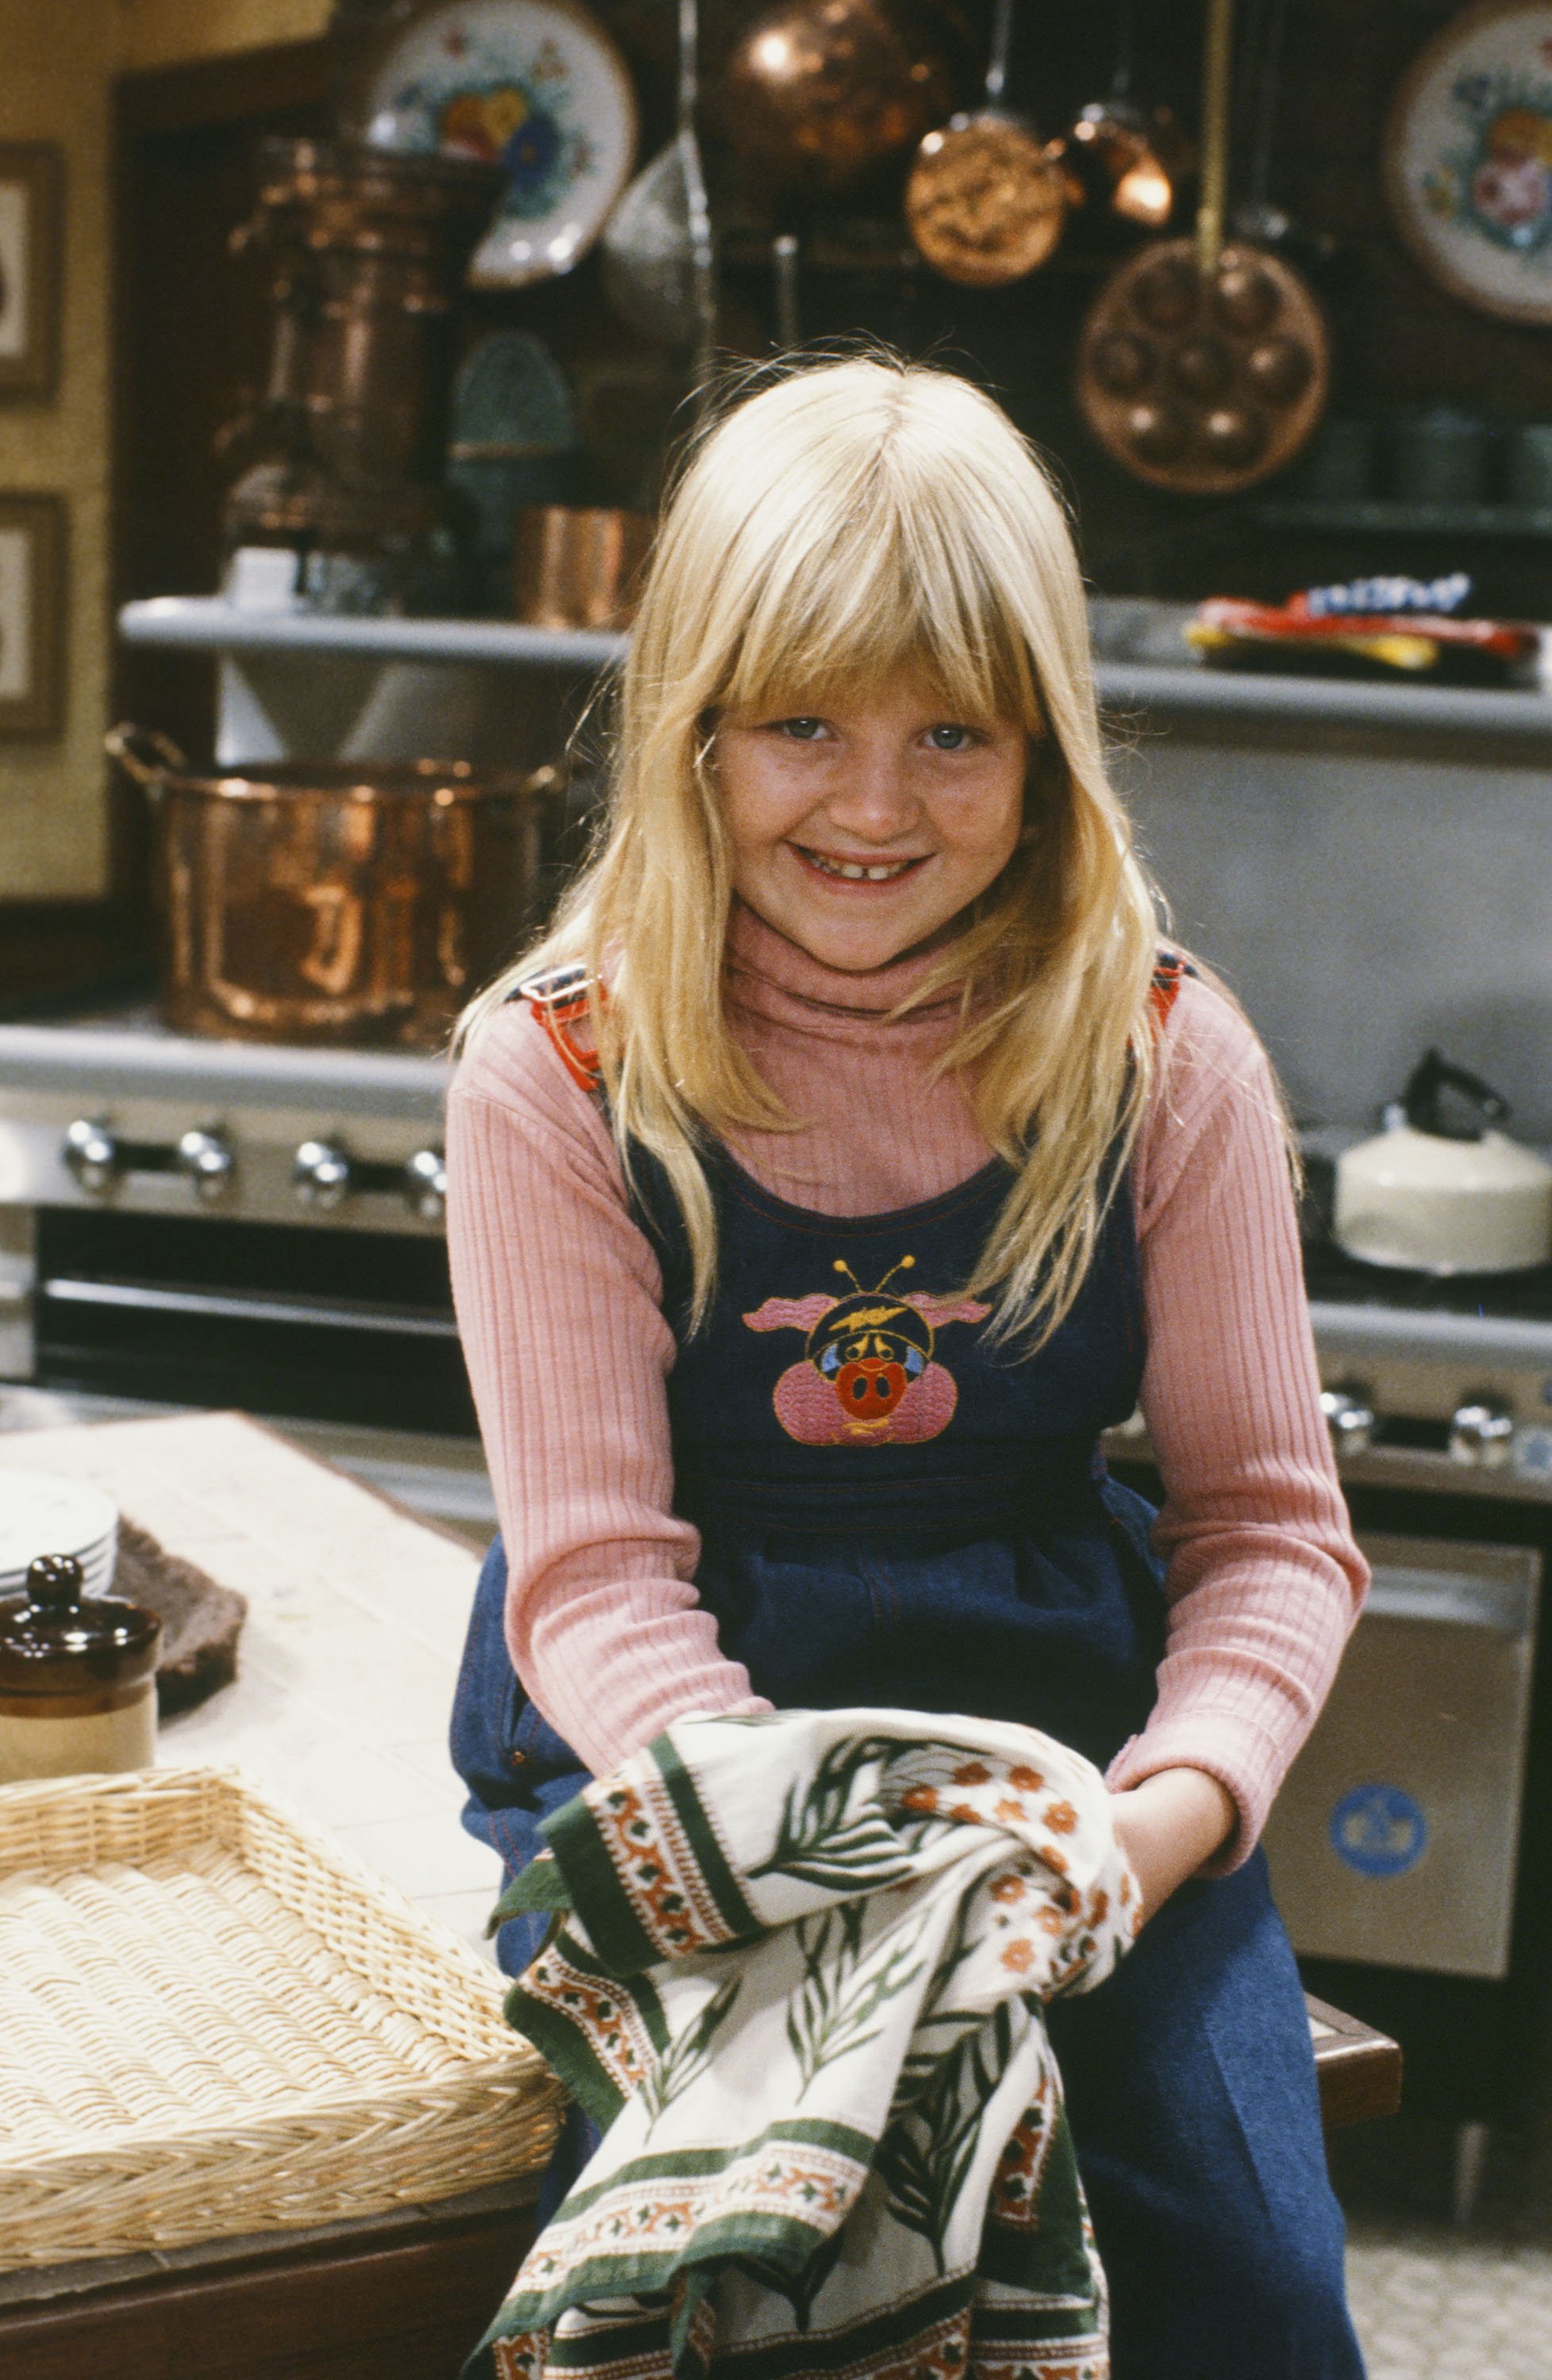 Tina Yothers as Jennifer Keaton in "Family Ties" | Photo: GettyImages